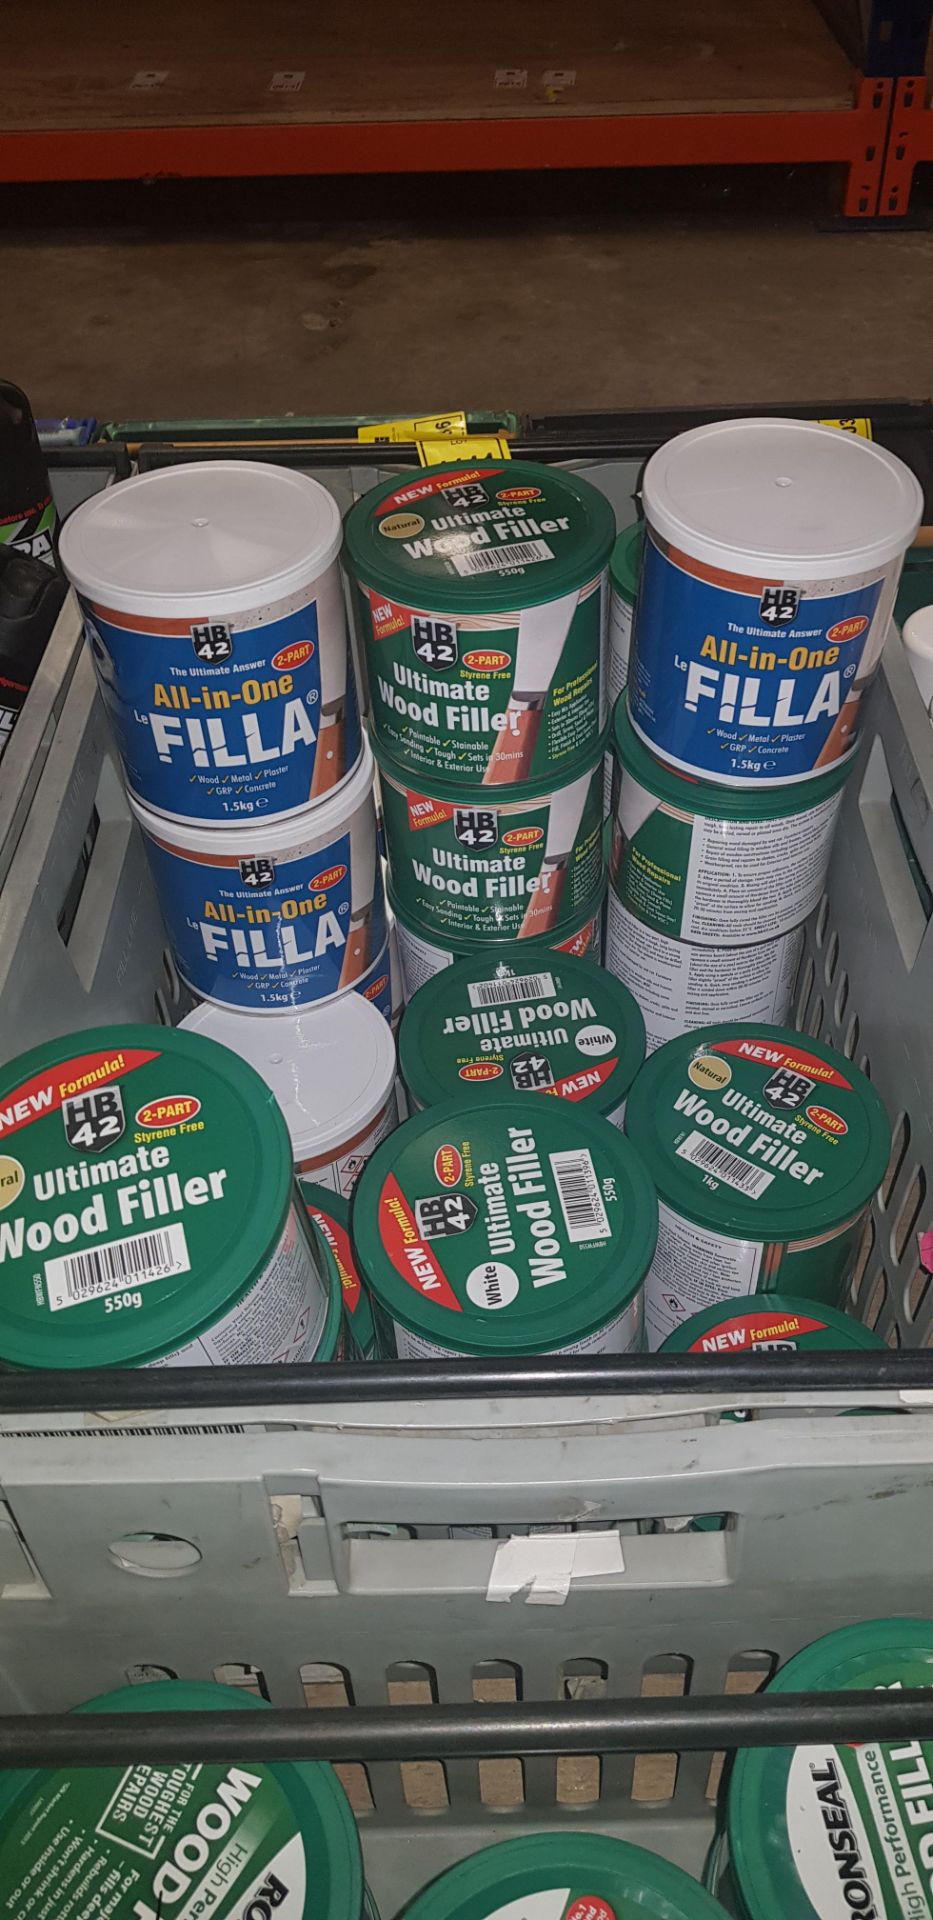 24 PIECE MIXED LOT CONTAINING HB42 NATURAL ULTIMATE WOOD FILLER AND HB42 ALL IN ONE LE FILLA